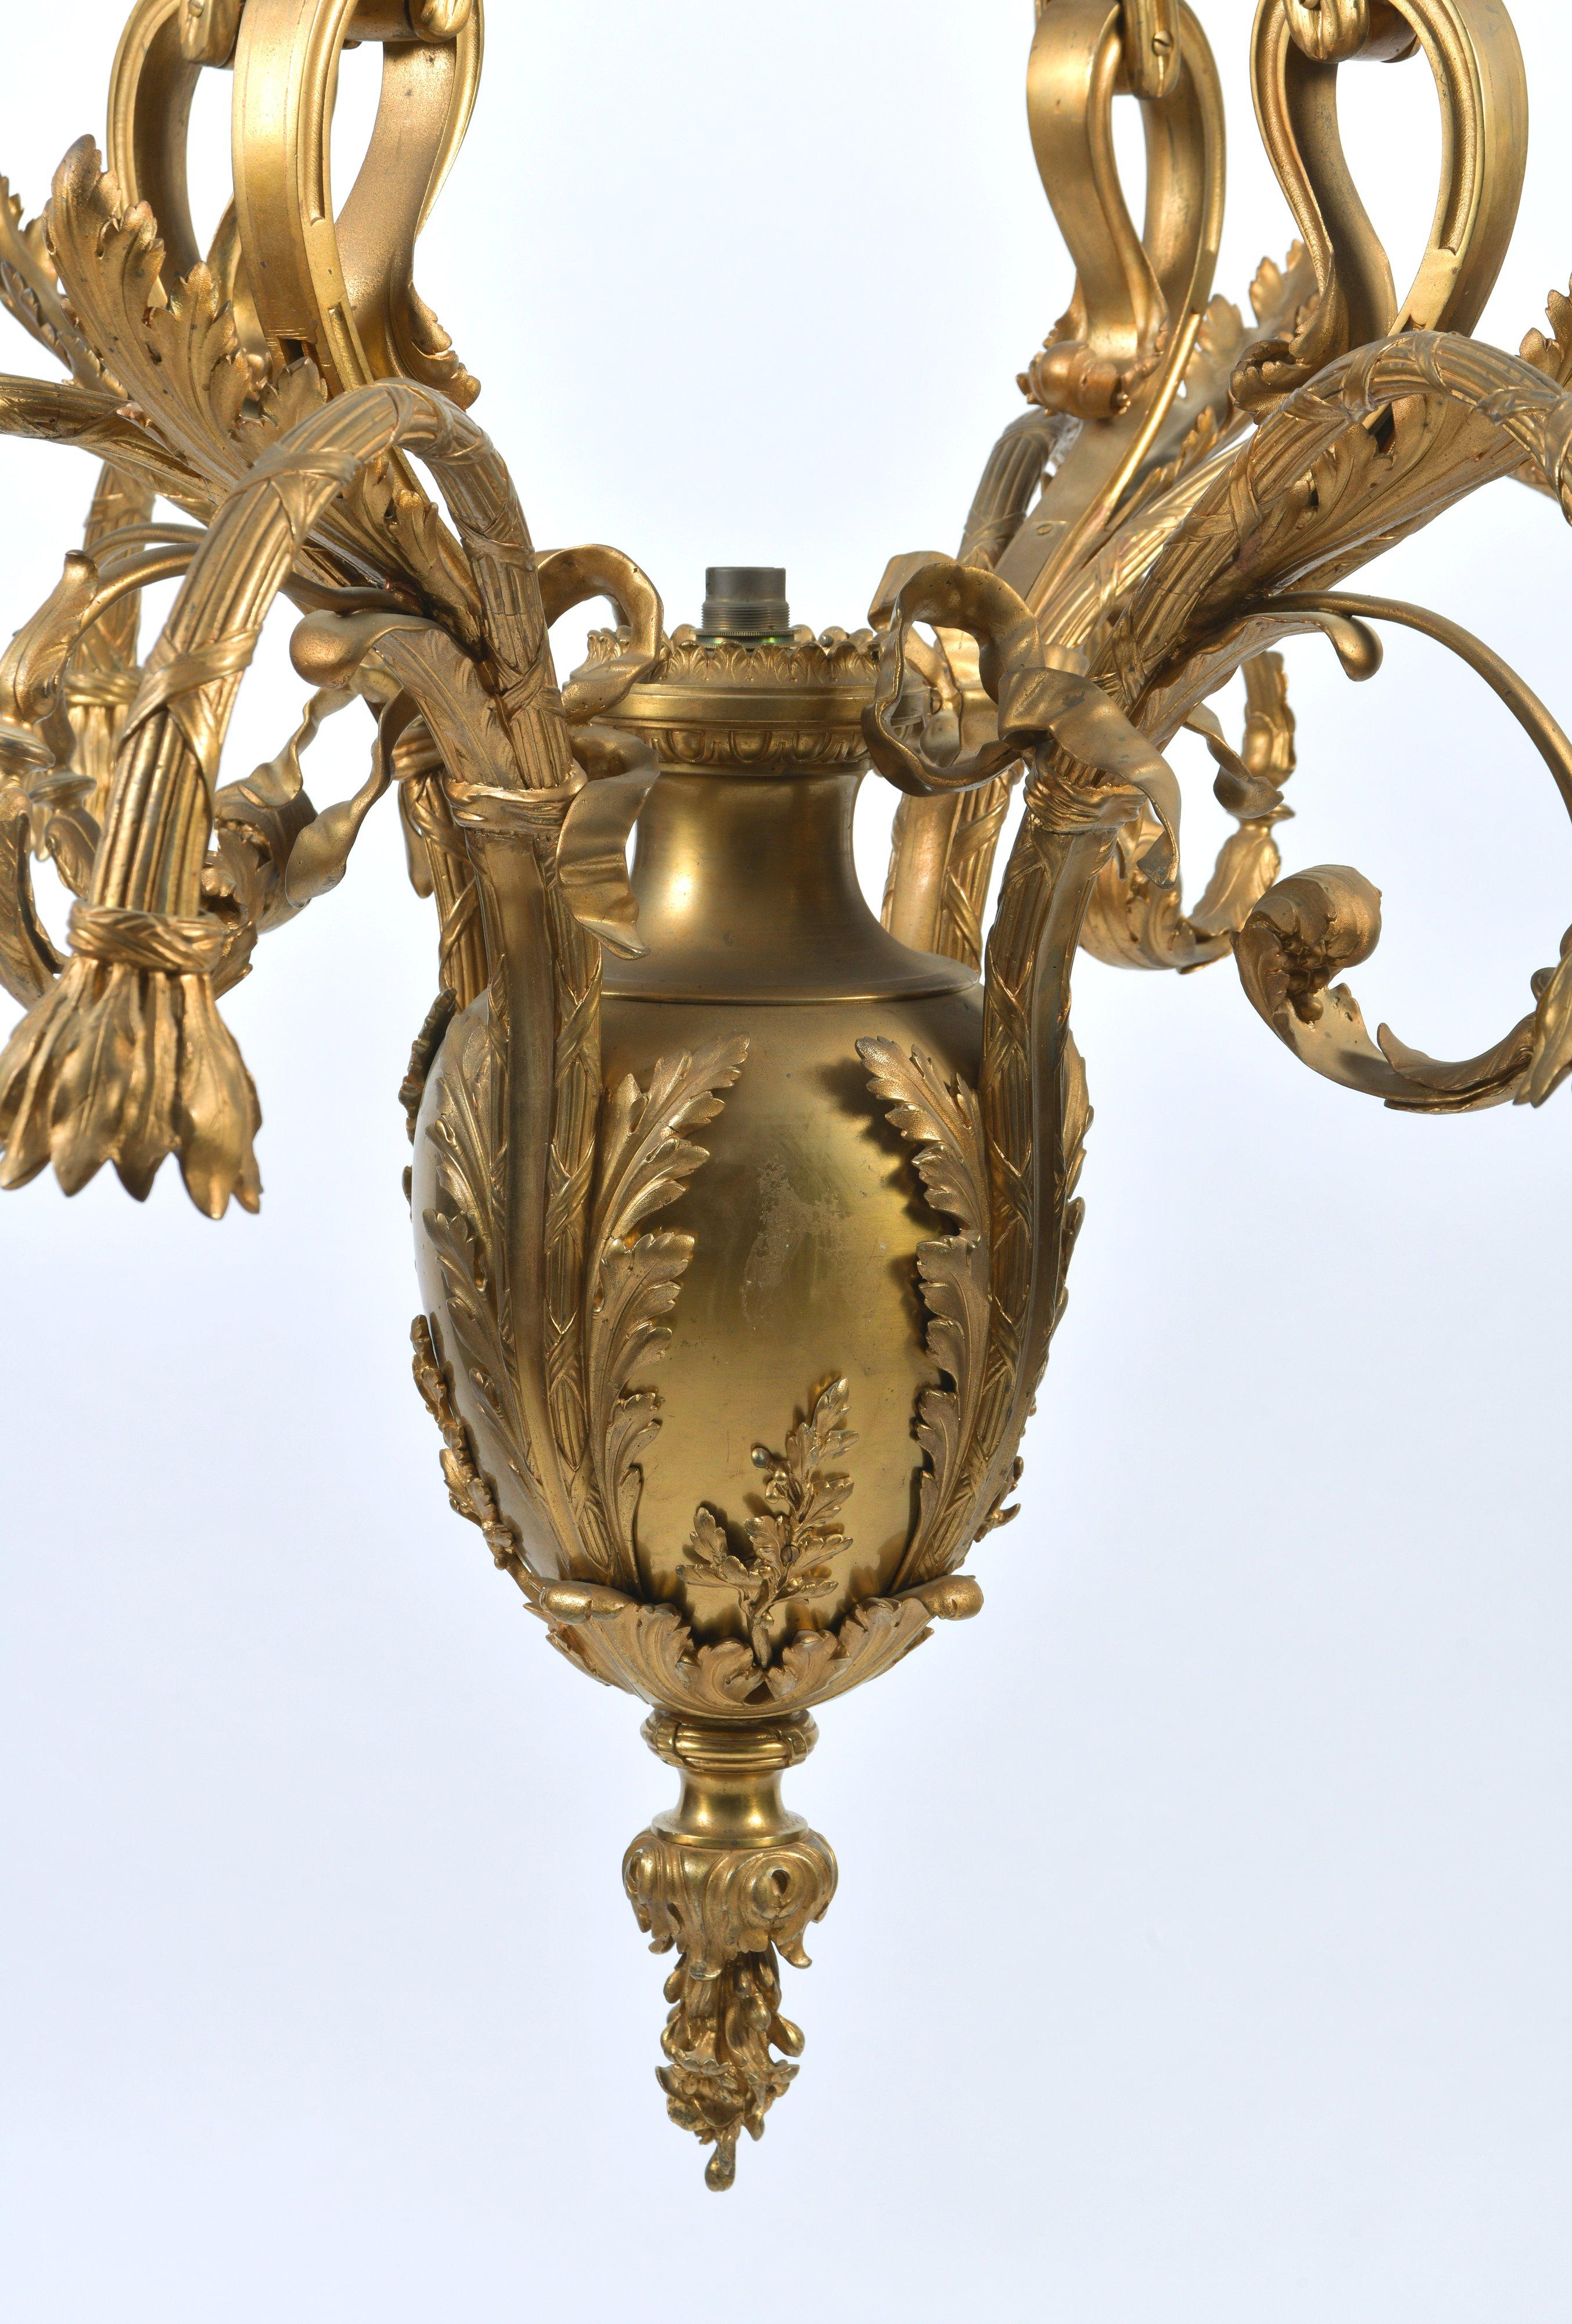 This stunning and highly ornate French ormolu chandelier features 9 curved arms surrounding an oval bulb centre suspended by 4 ‘tied fabric’ styled supports. It measures 37 ½ in – 95.5 cm in diameter and 53 in – 134.7 cm in height. The attention to